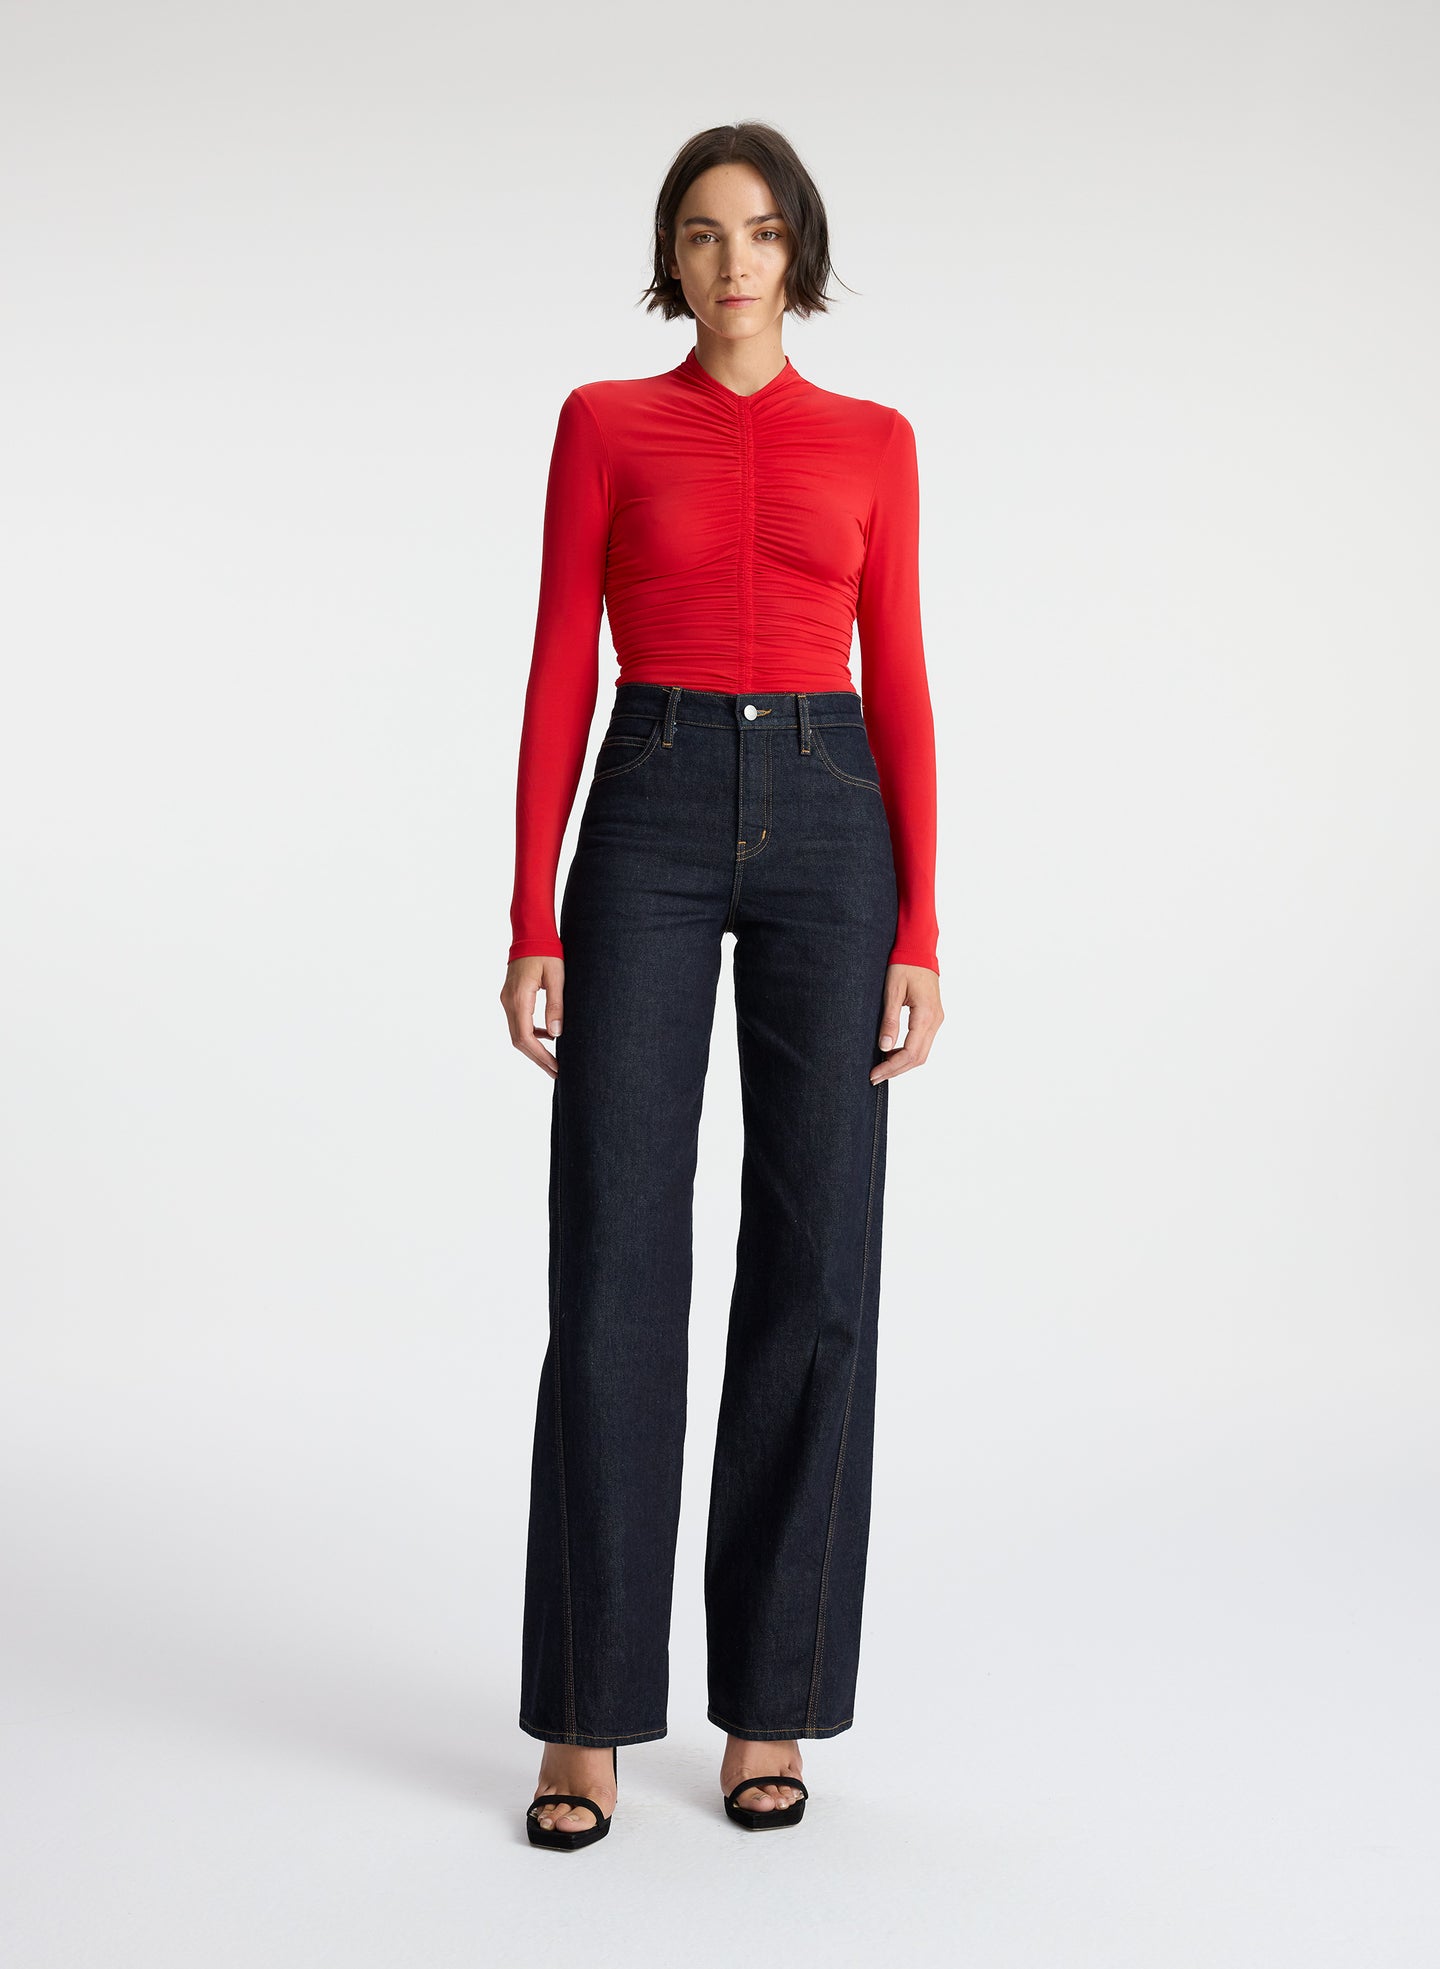 front view of woman wearing red ruched long sleeve top and dark wash jeans